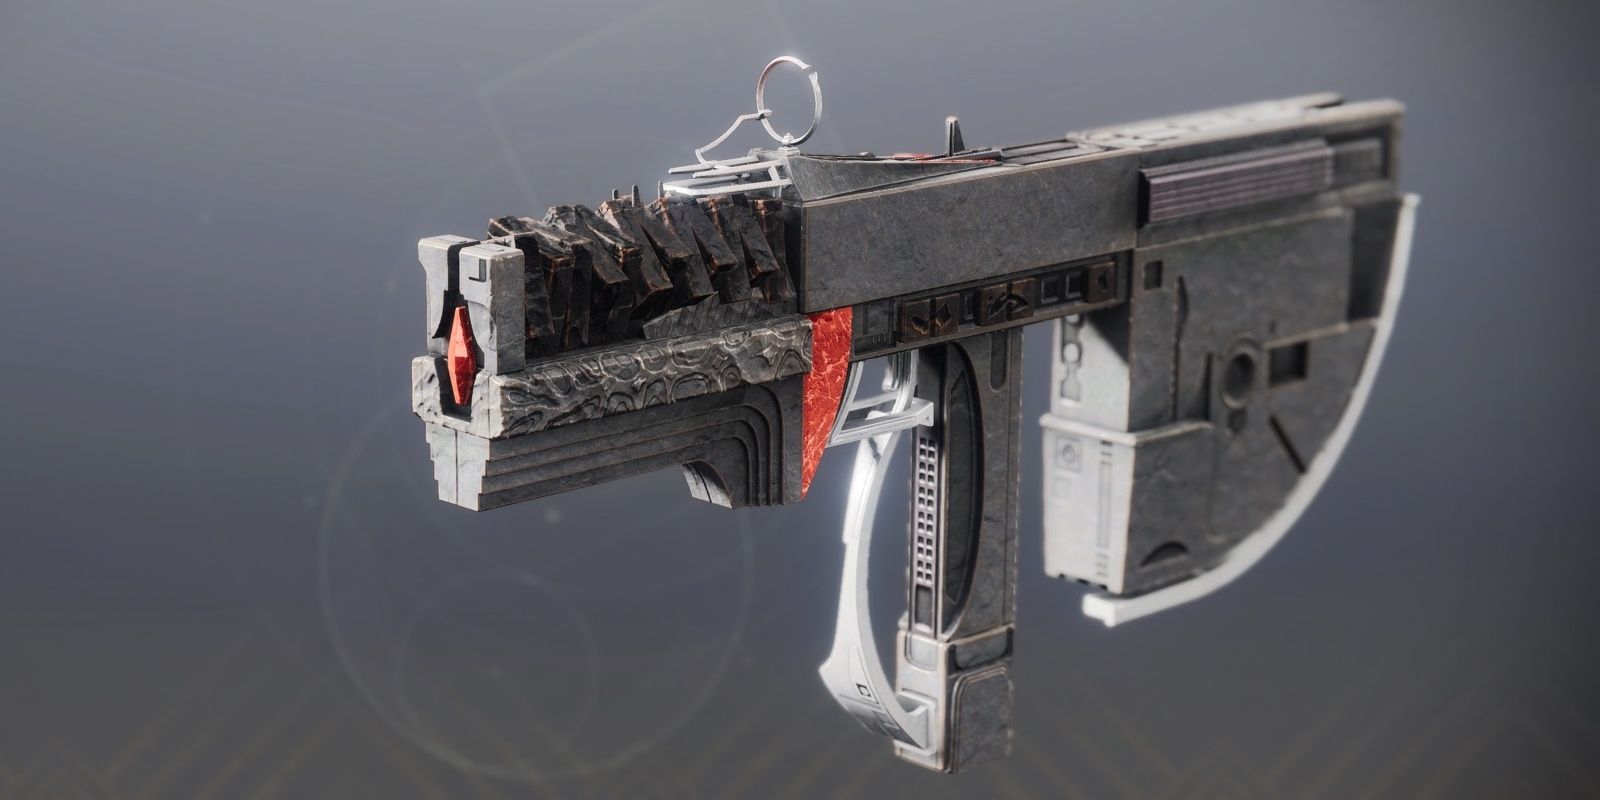 The SMG, Submission with its standard gray and orange shading and animated barrel quivering on a gray background.